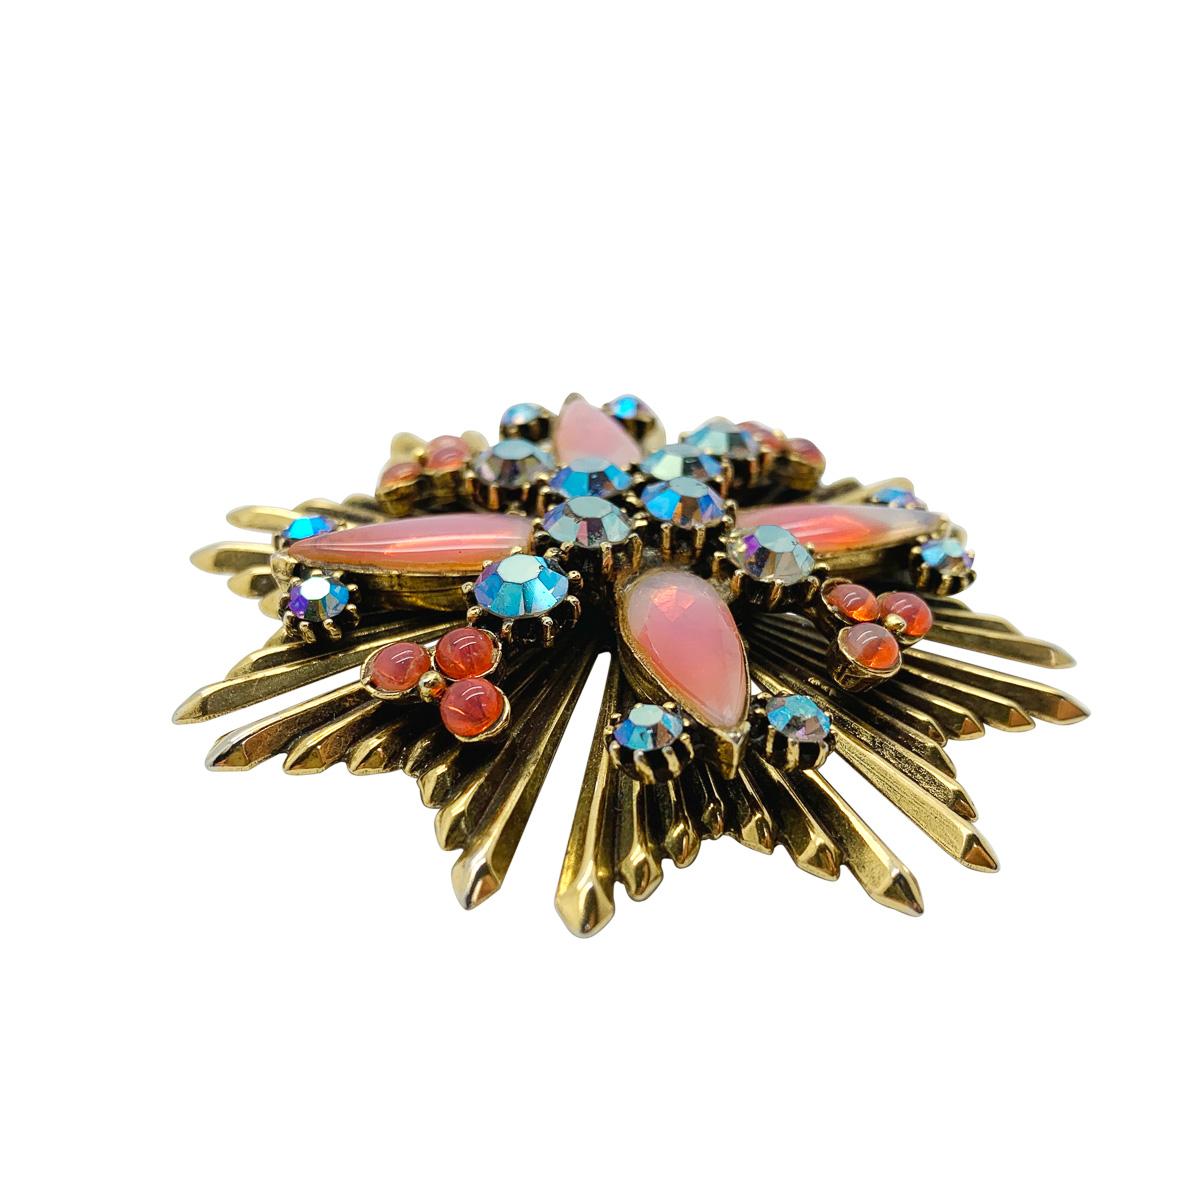 A wonderfully dramatic and opulent vintage Florenza opaline brooch. The forever stylish Maltese cross inspired design is lavishly decorated with an array of stones. The large and impressive opaline teardrop stones give way to smaller cabochon